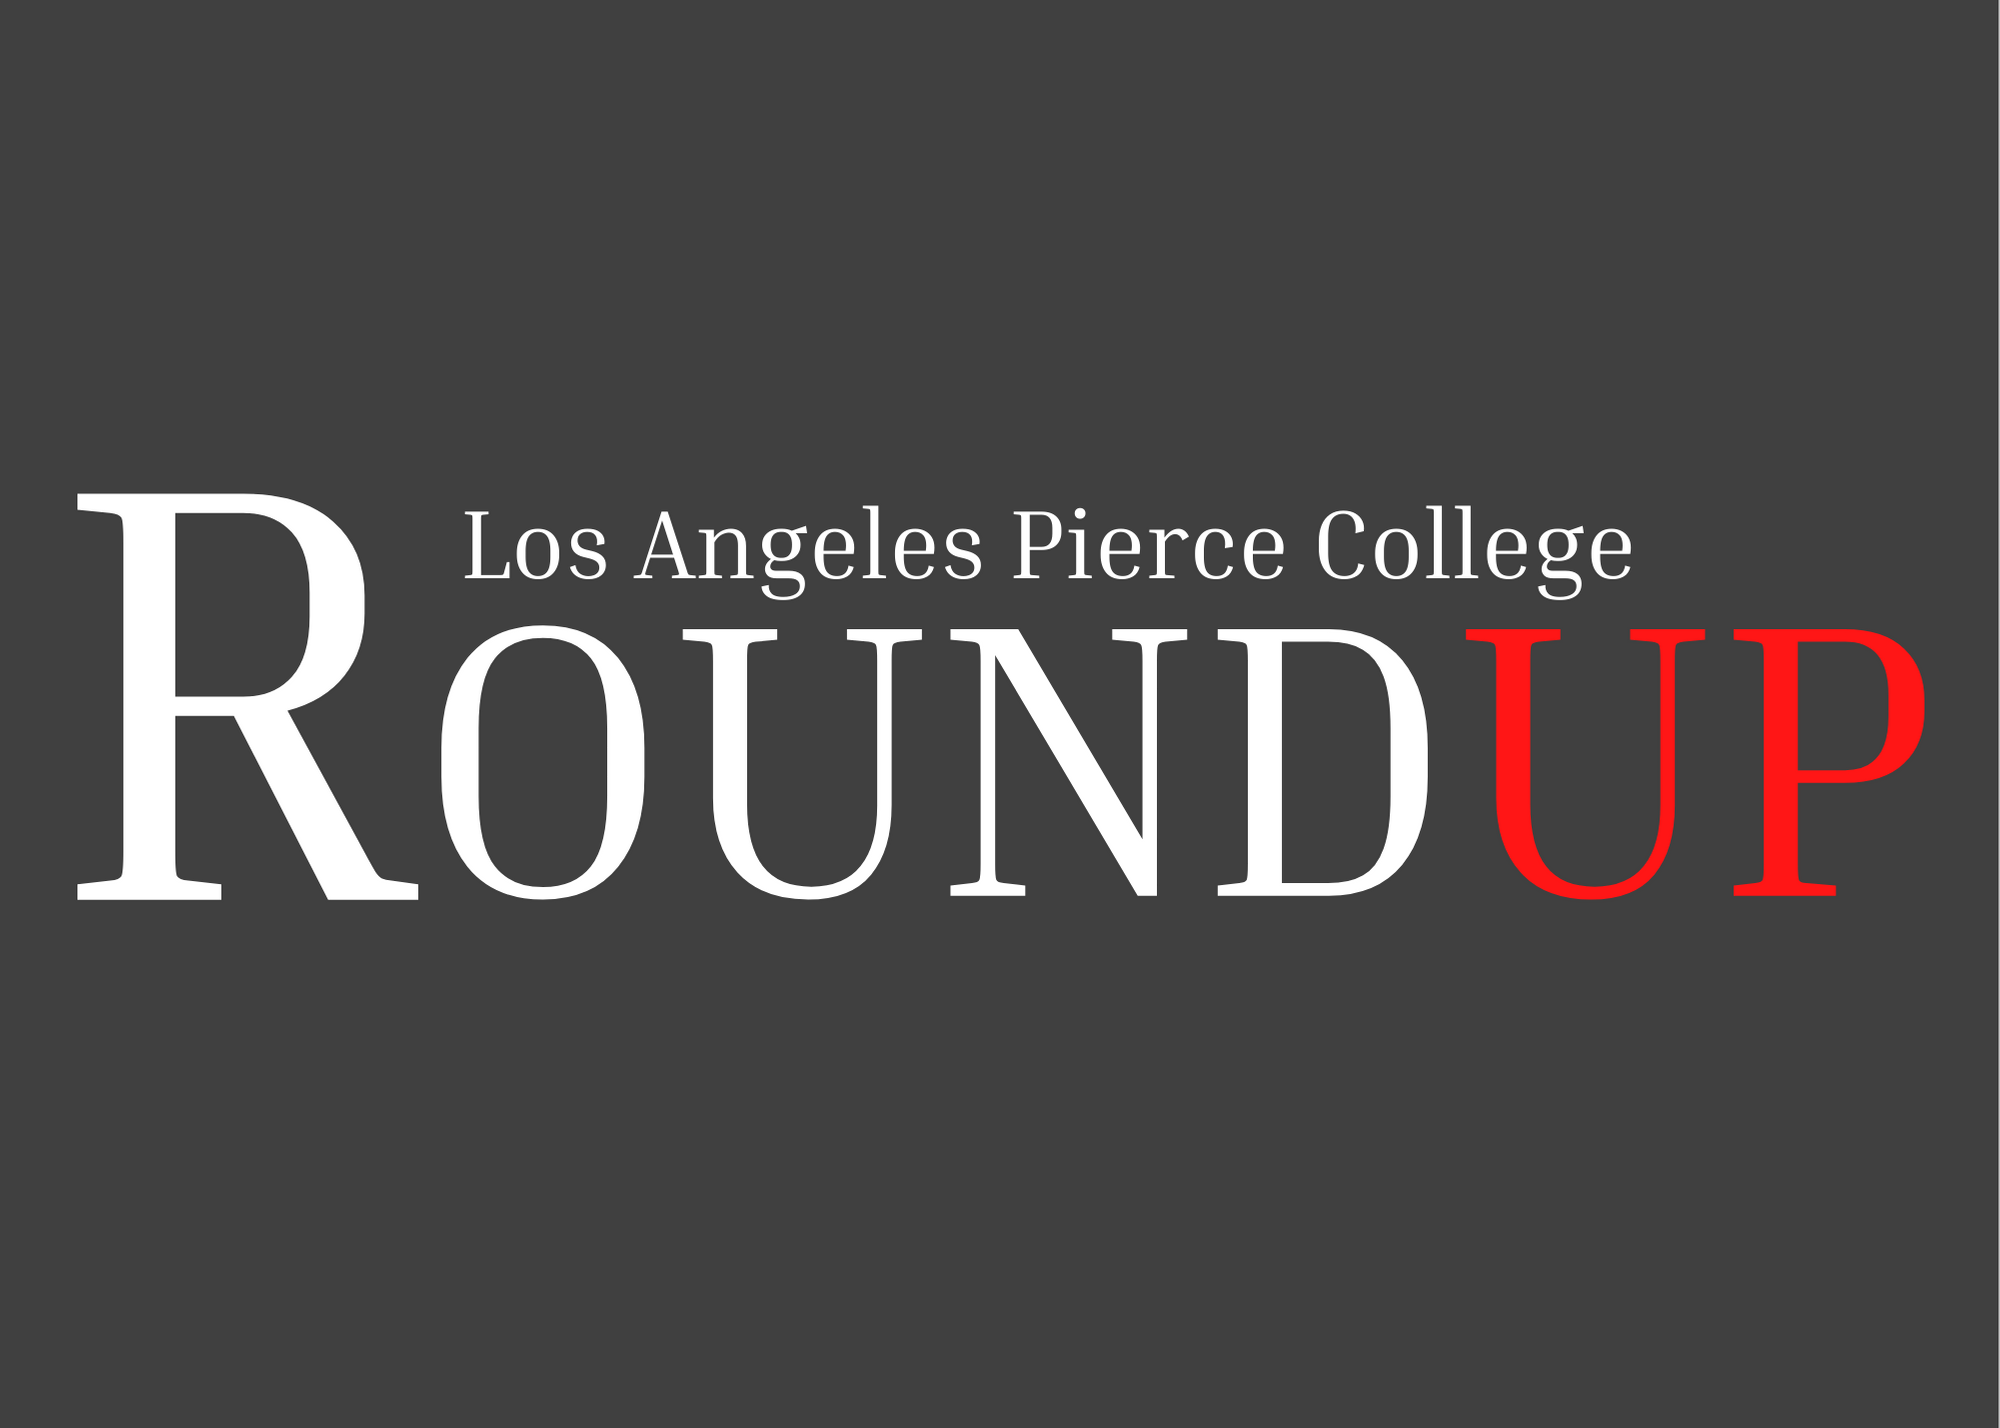 The Asian American and Pacific Islander college community speak up